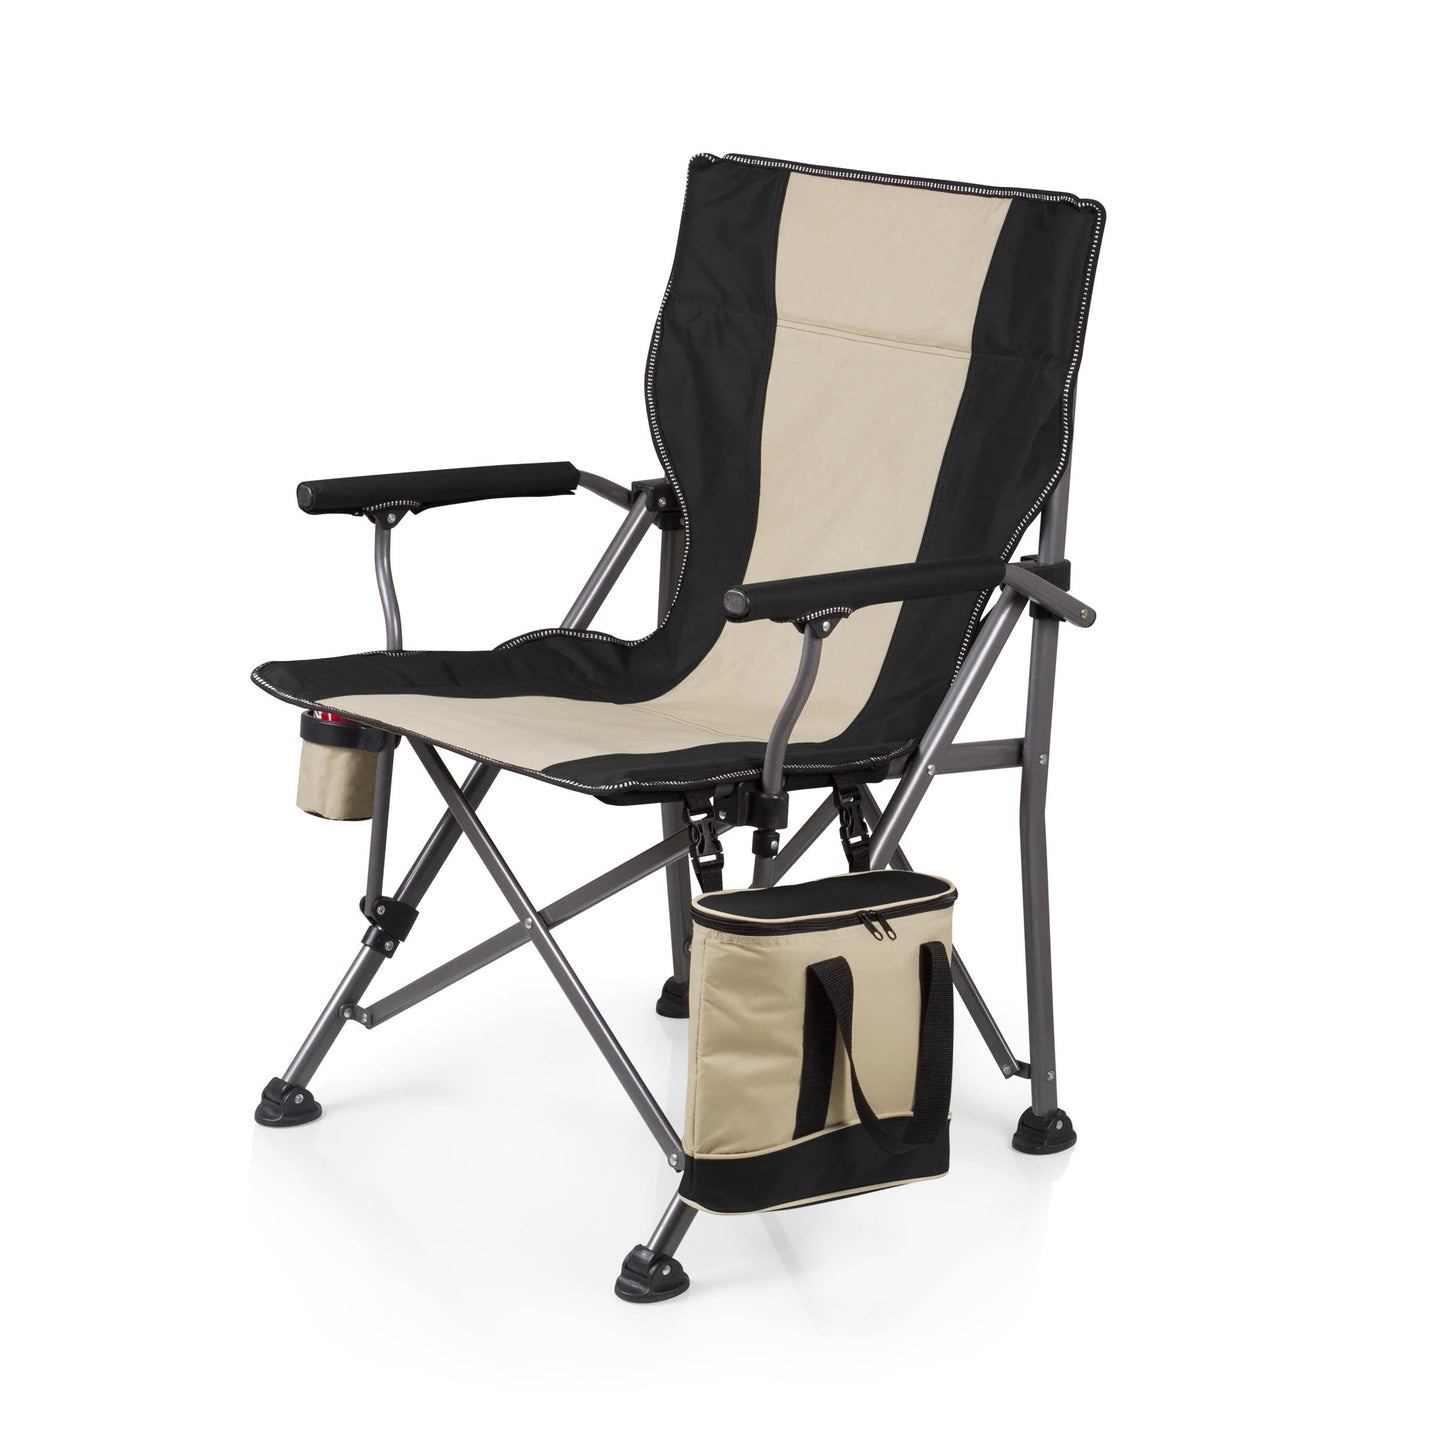 Carolina Panthers - Outlander Folding Camping Chair with Cooler